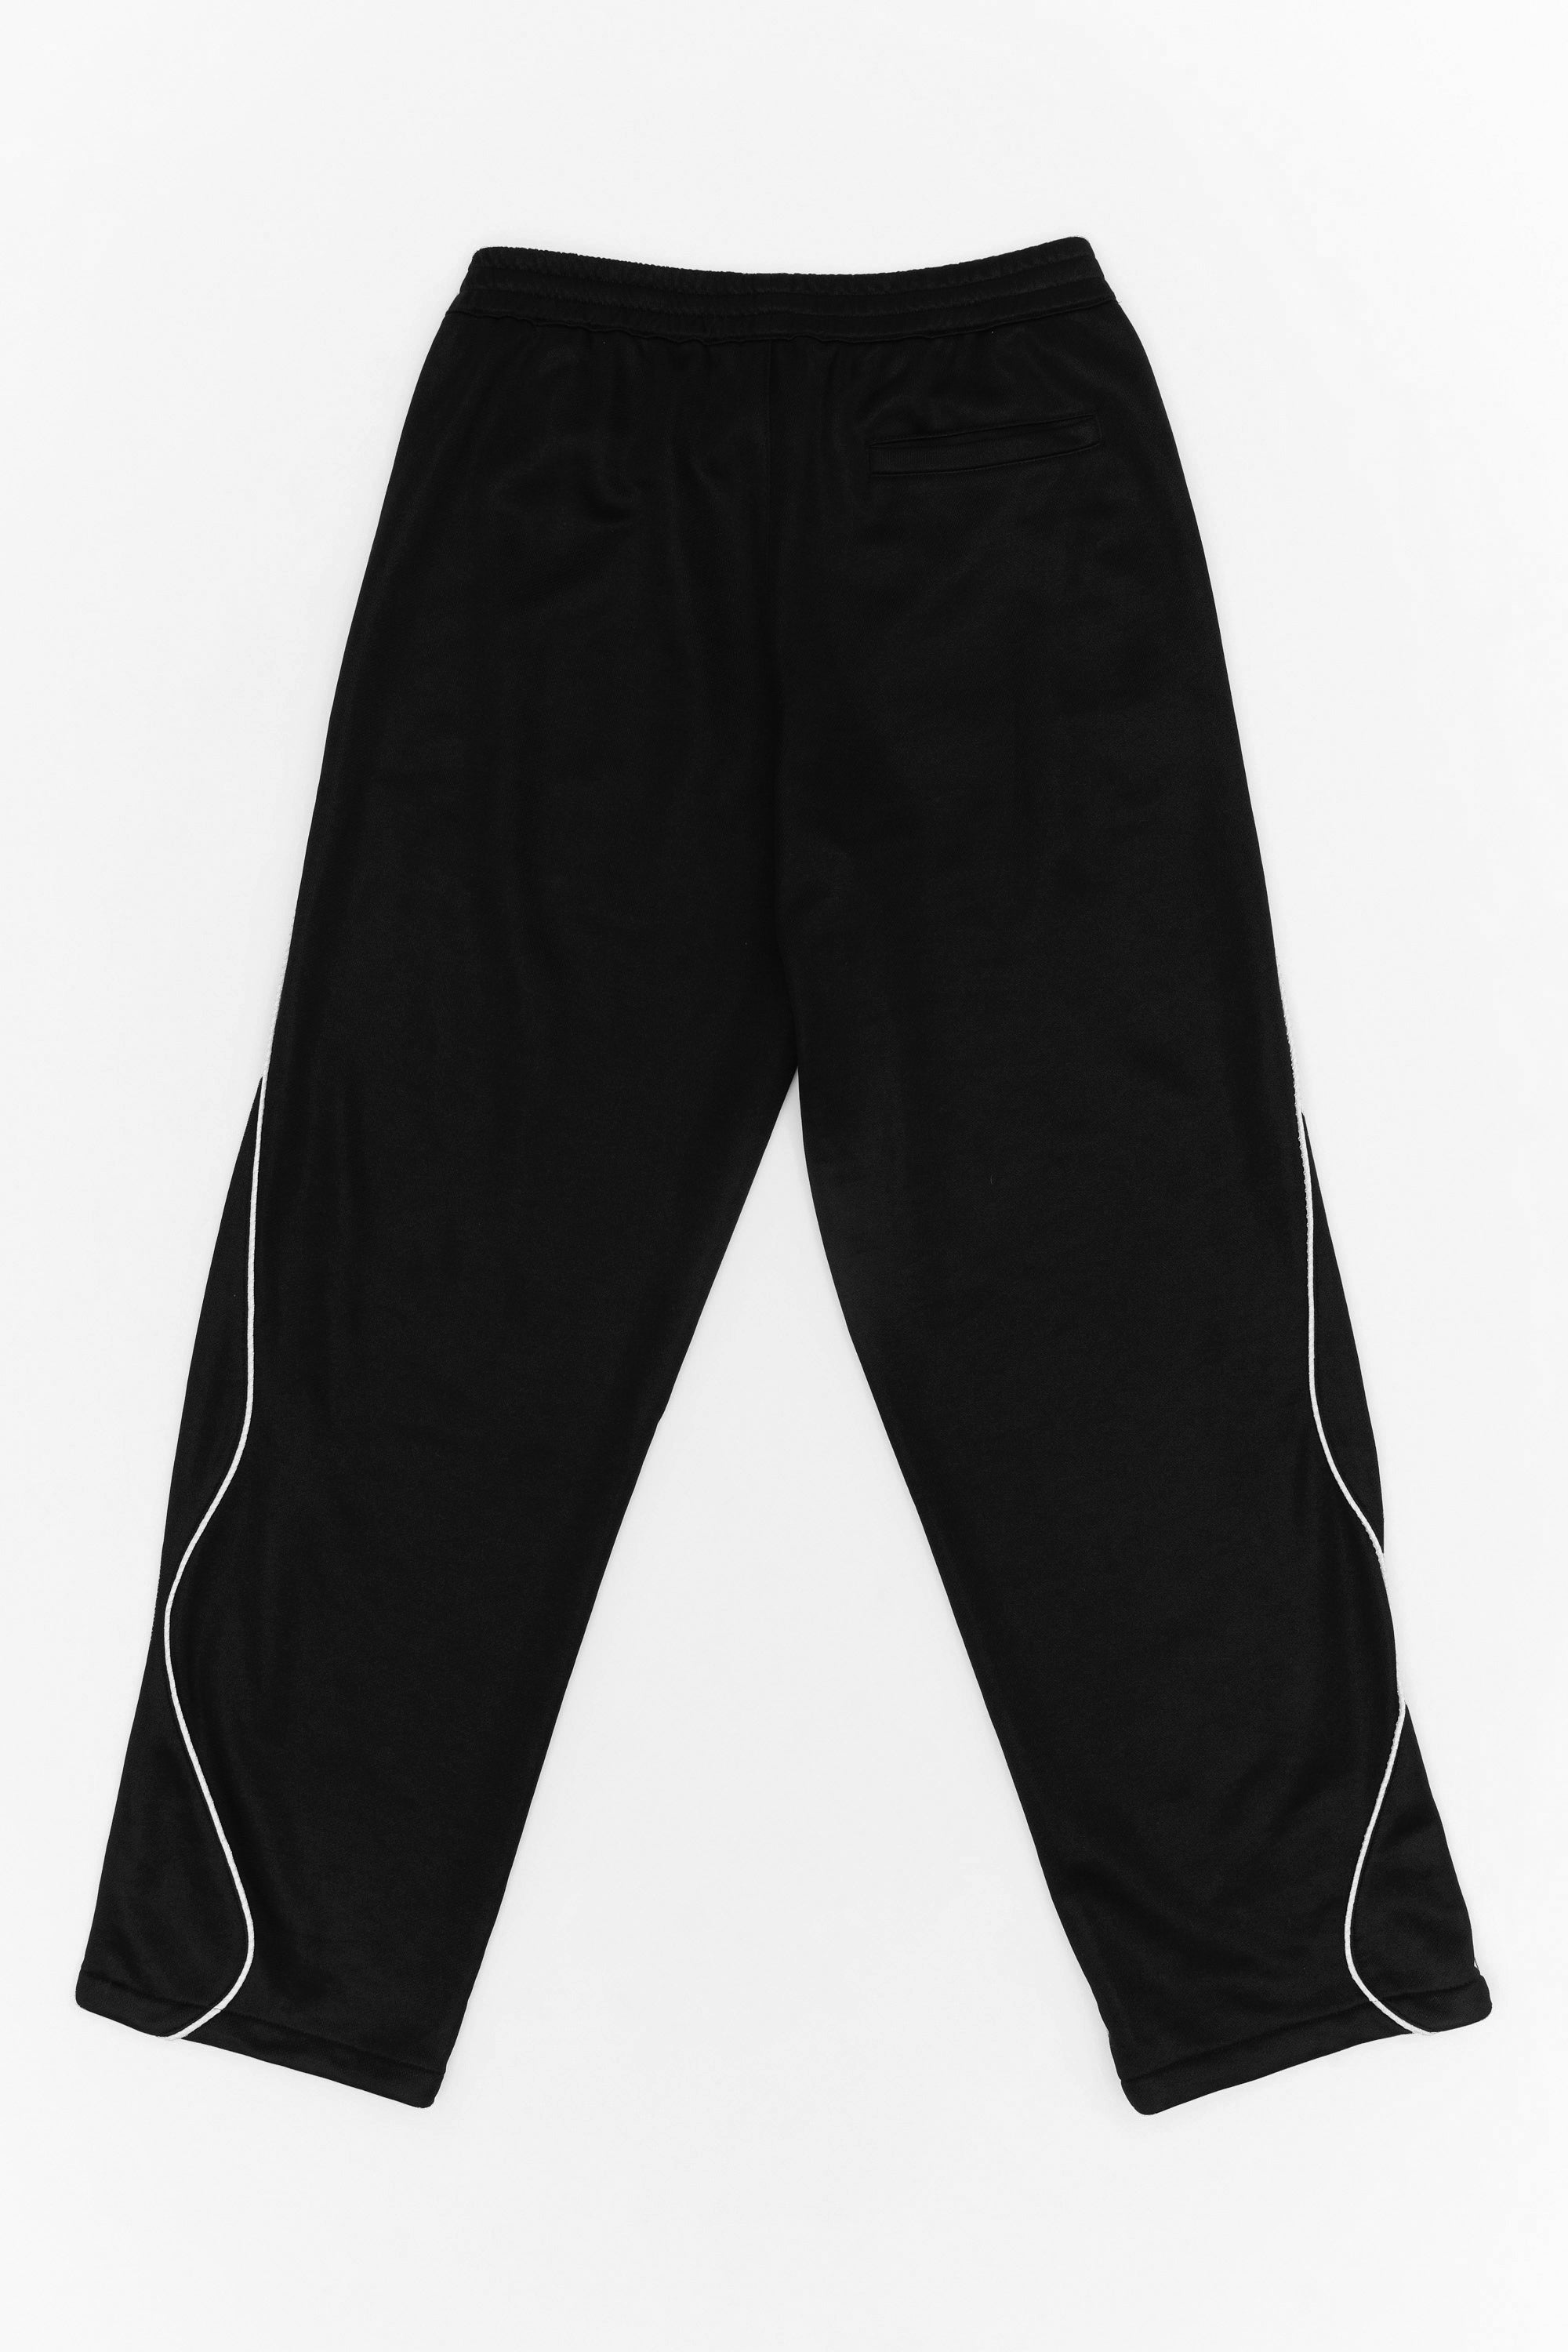 The GATEWAY MIRAGE TRACK PANT  available online with global shipping, and in PAM Stores Melbourne and Sydney.